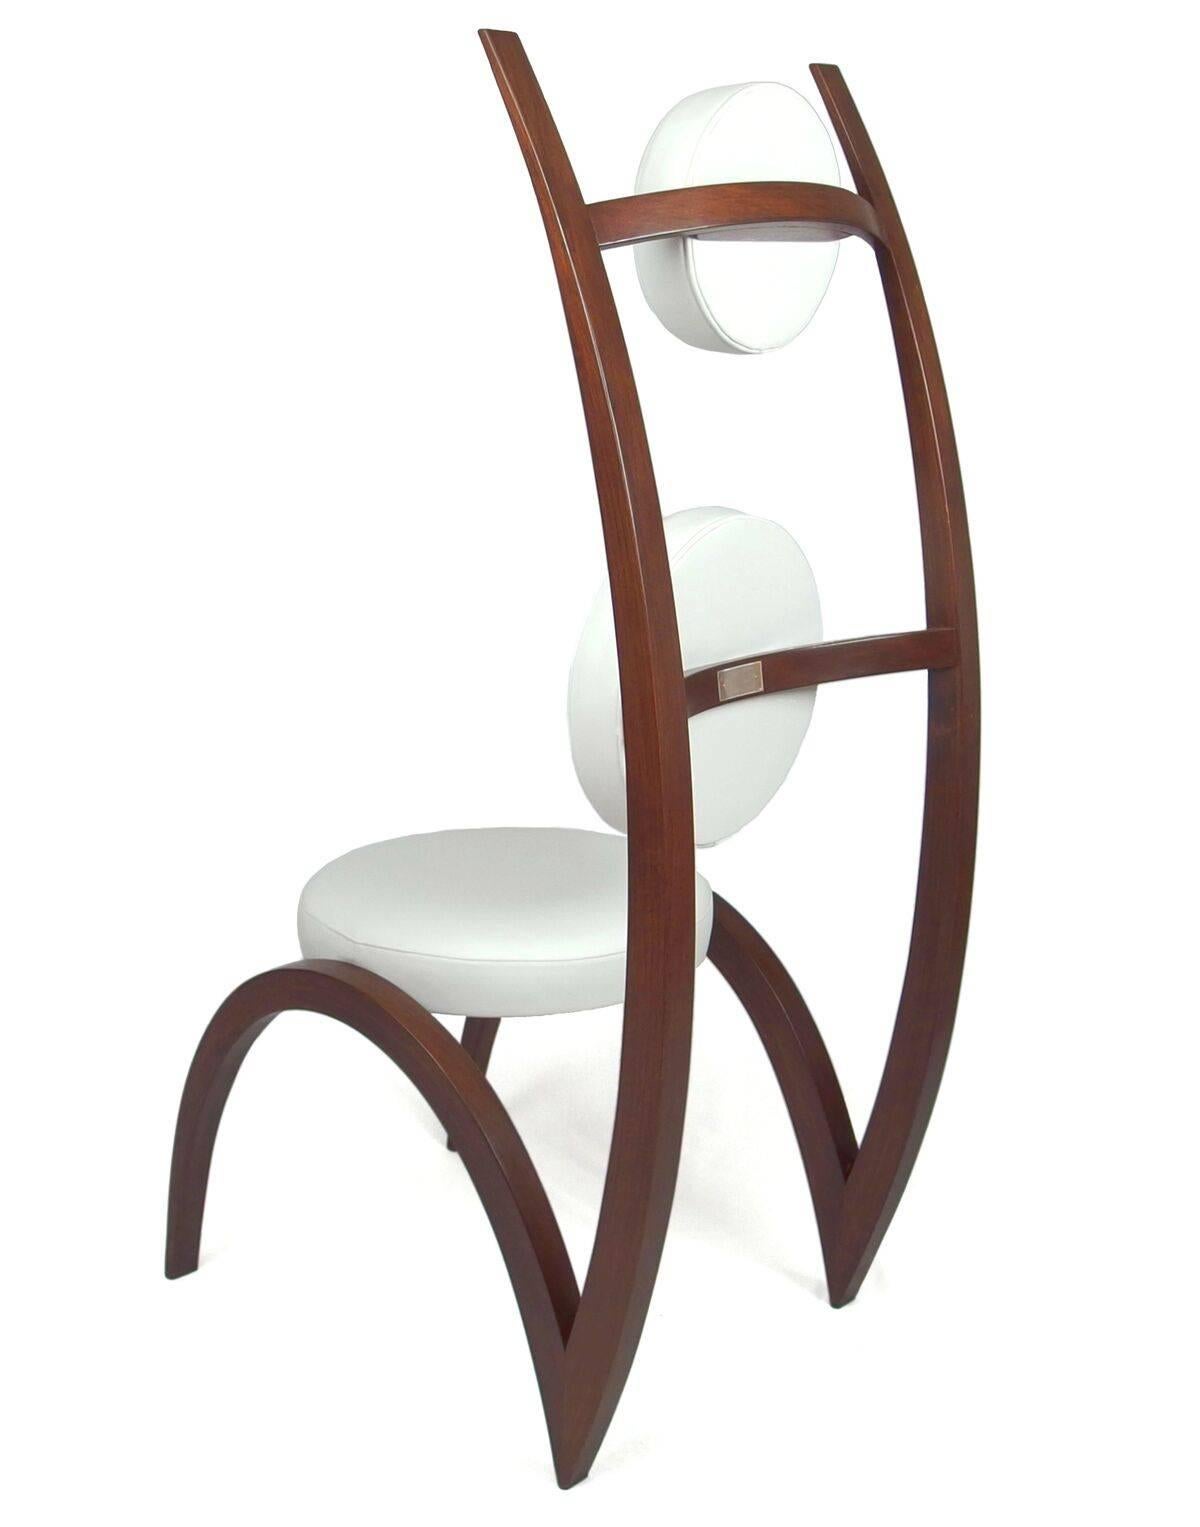 Italian Arched Chair Editioned by Massimo Farina